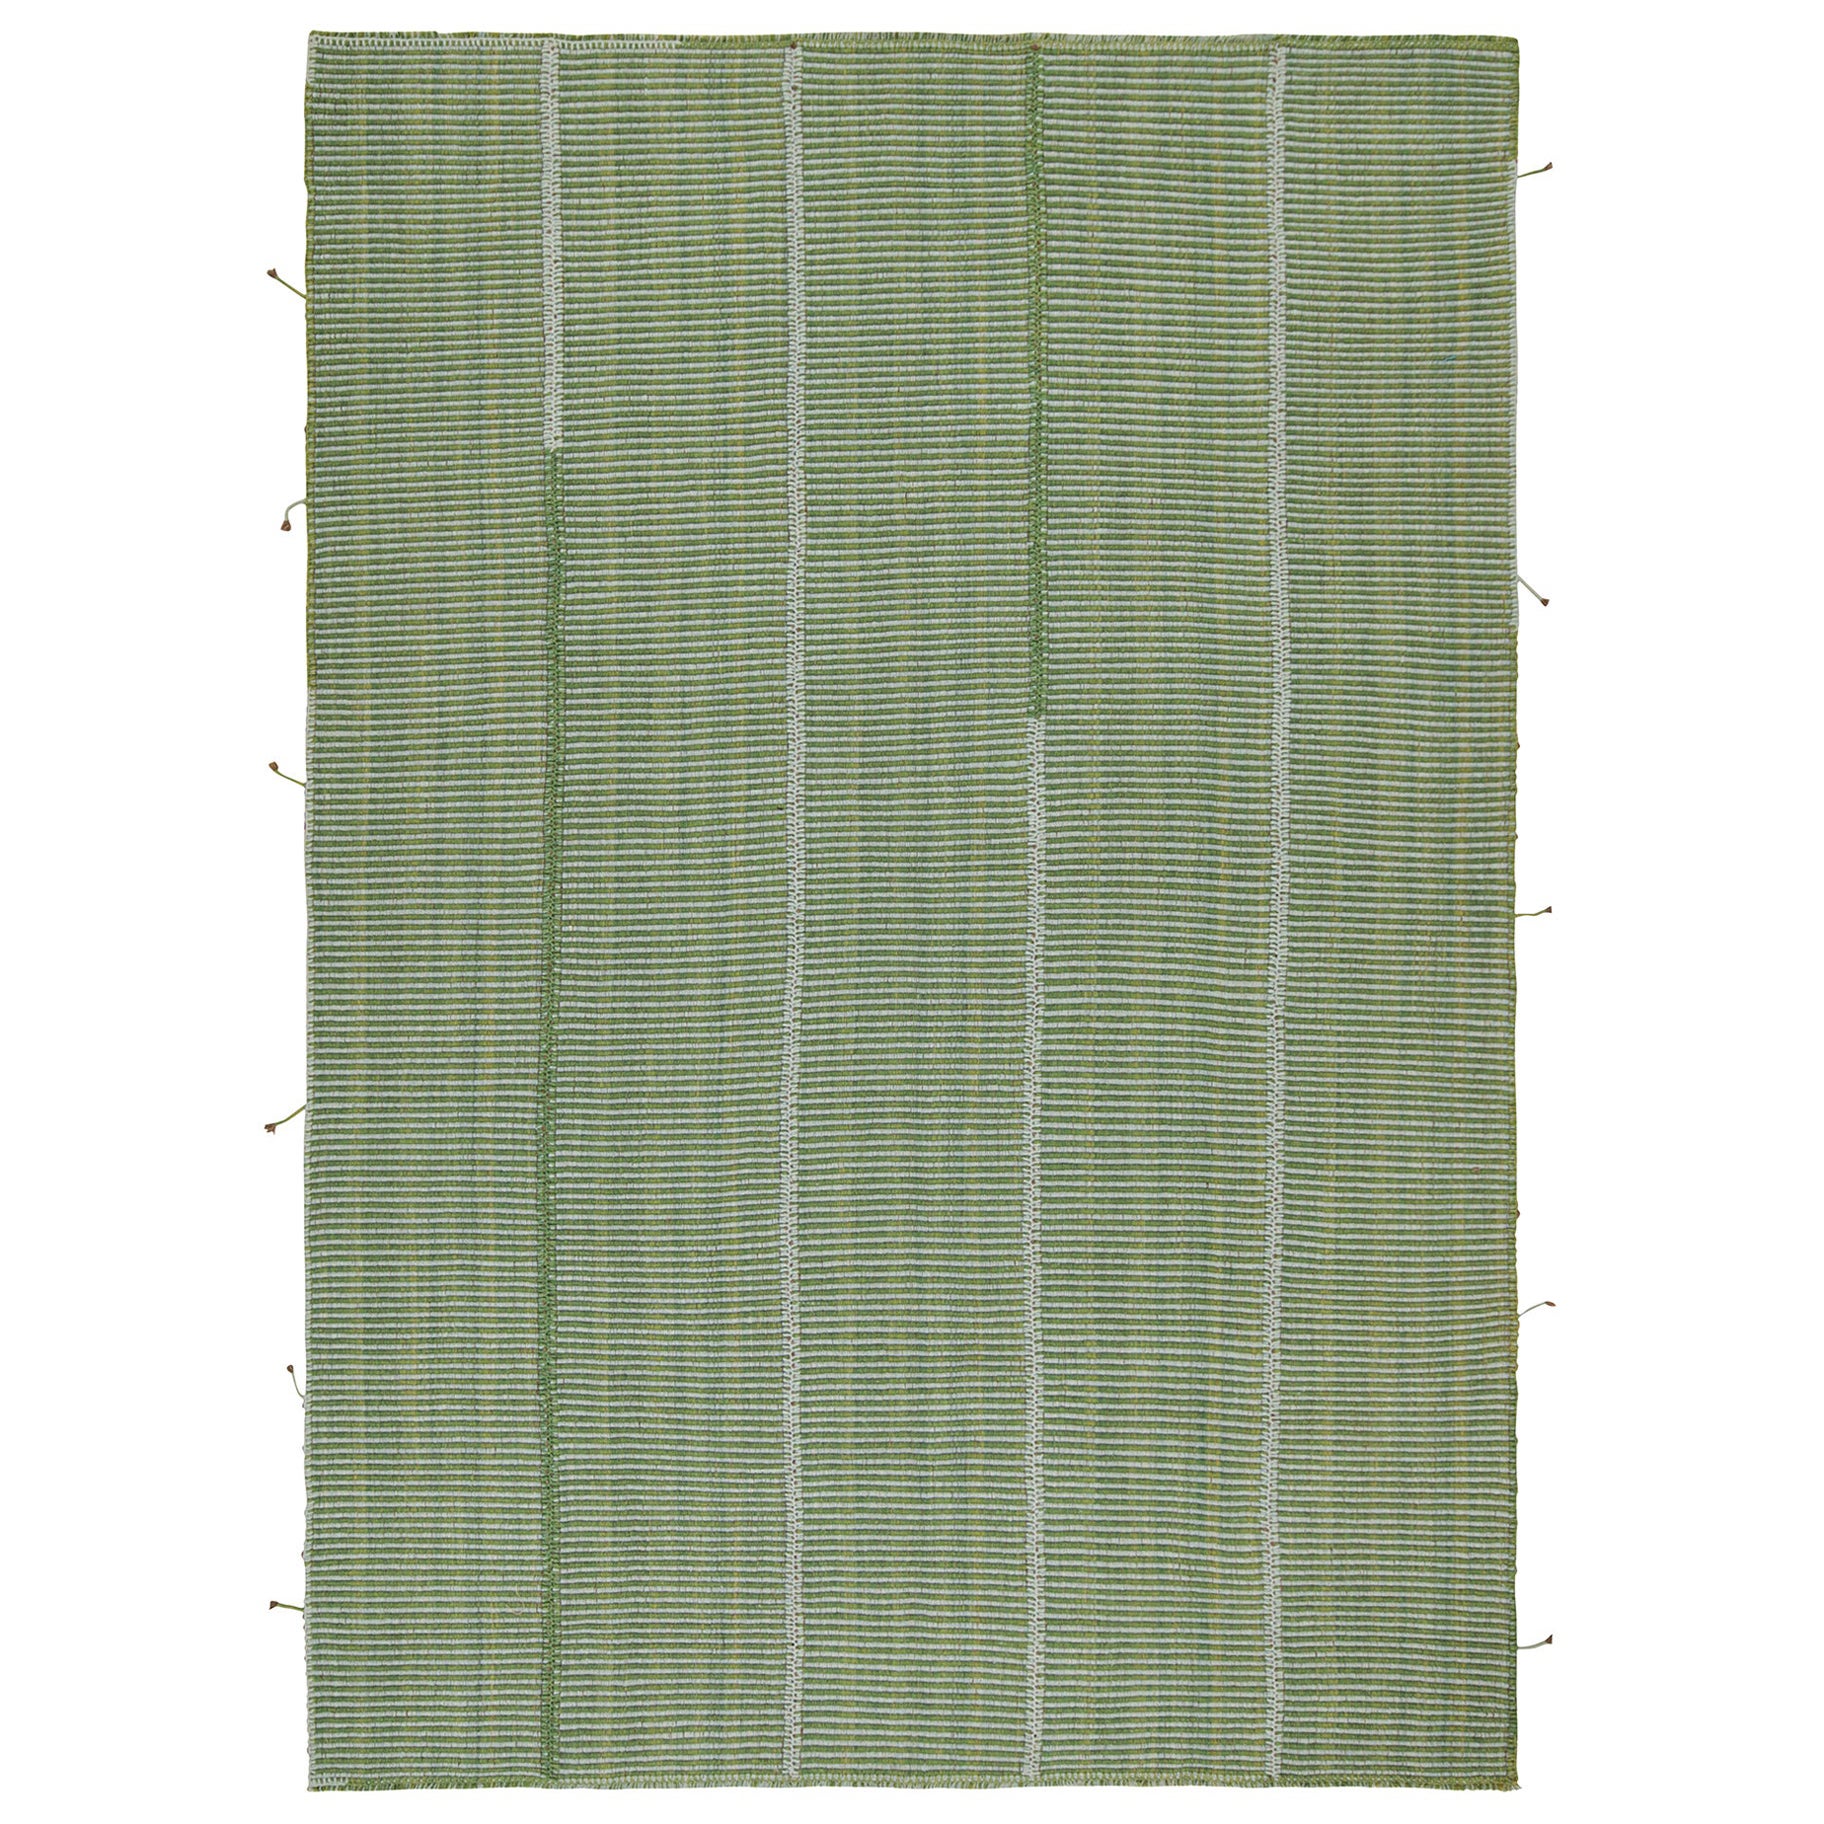 Rug & Kilim’s Contemporary Kilim Rug in Green and Blue Stripes